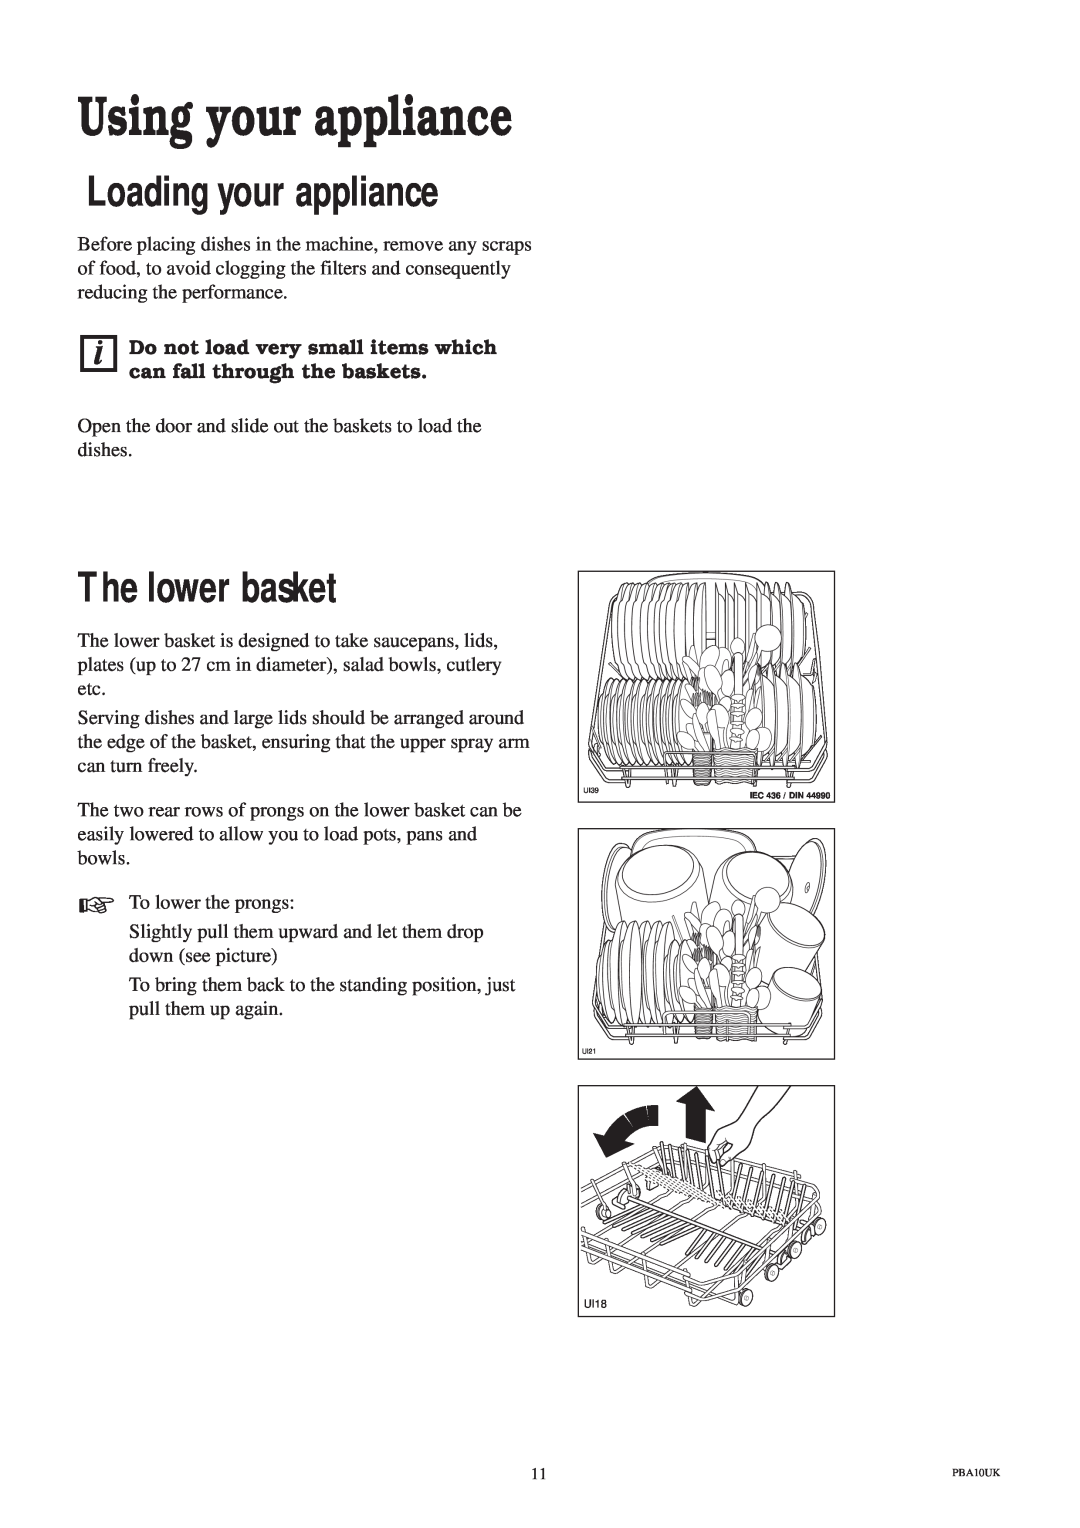 Zanussi ZT 685 manual Using your appliance, Loading your appliance, The lower basket 